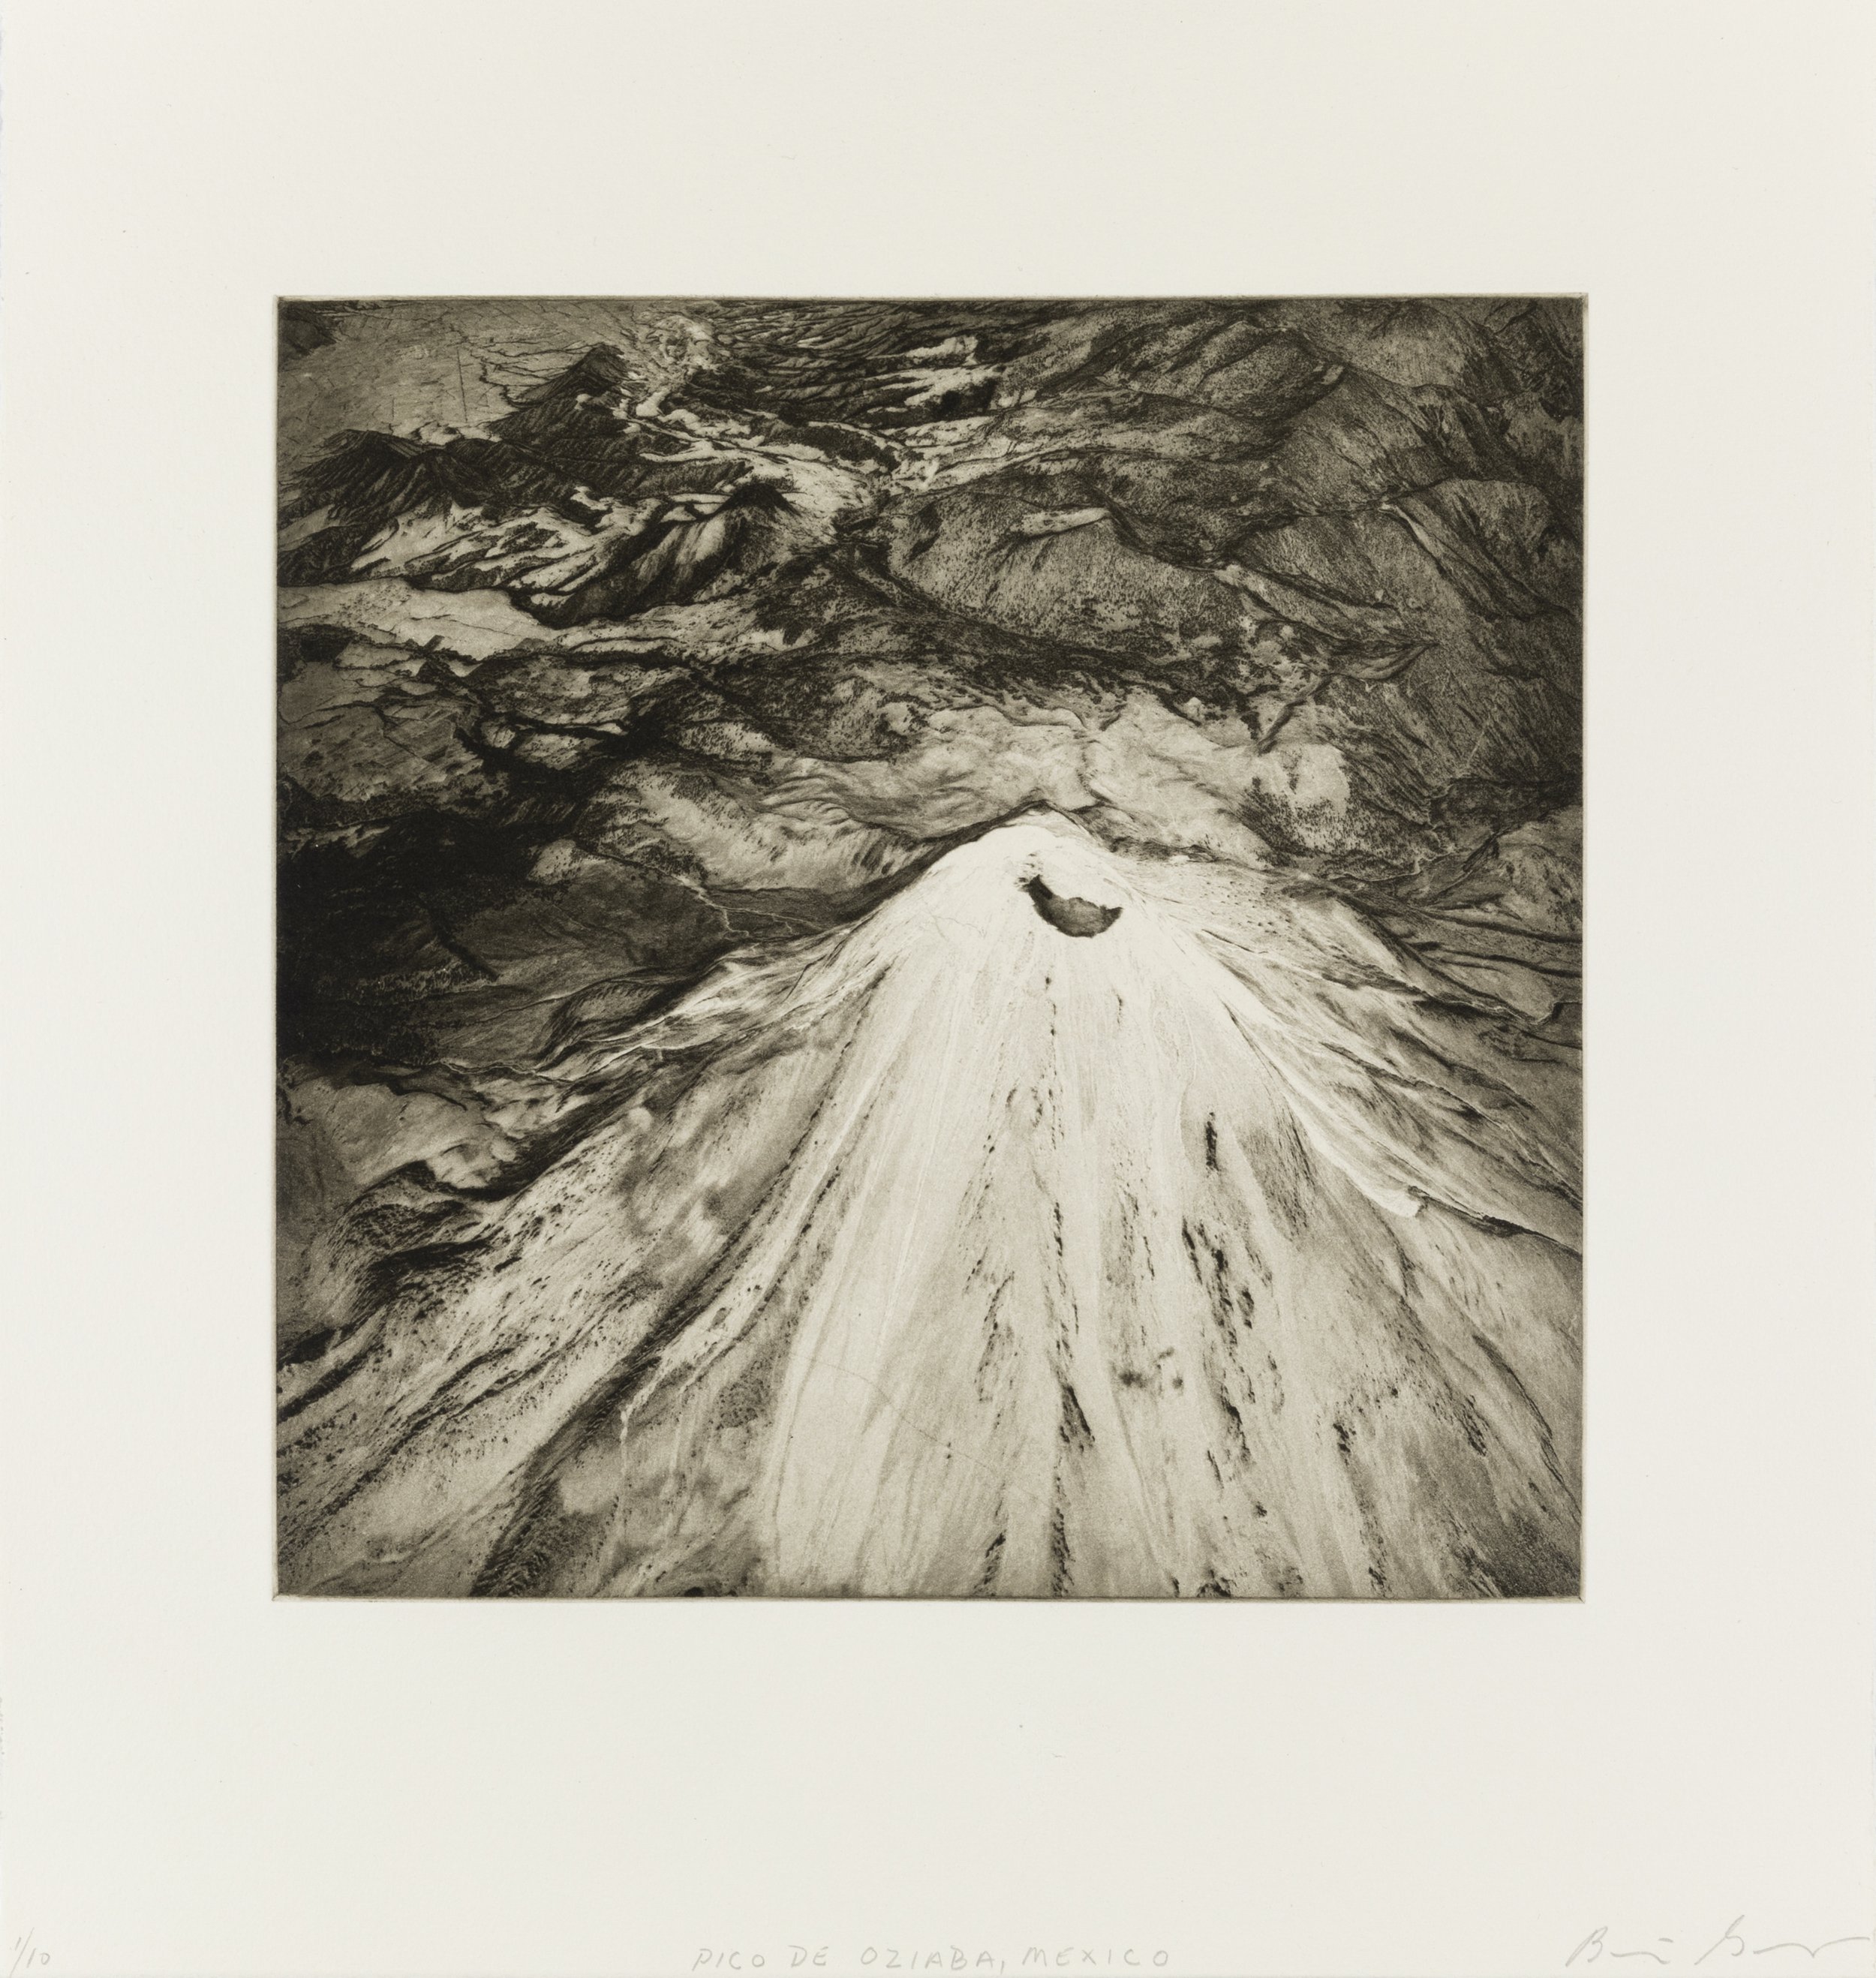    Pico de Orziaba, Mexico, 2021   Copperplate photogravure etching on cotton rag paper, plate size; 10.6 x 10.6, paper size; 16 x 15.5, edition 10  